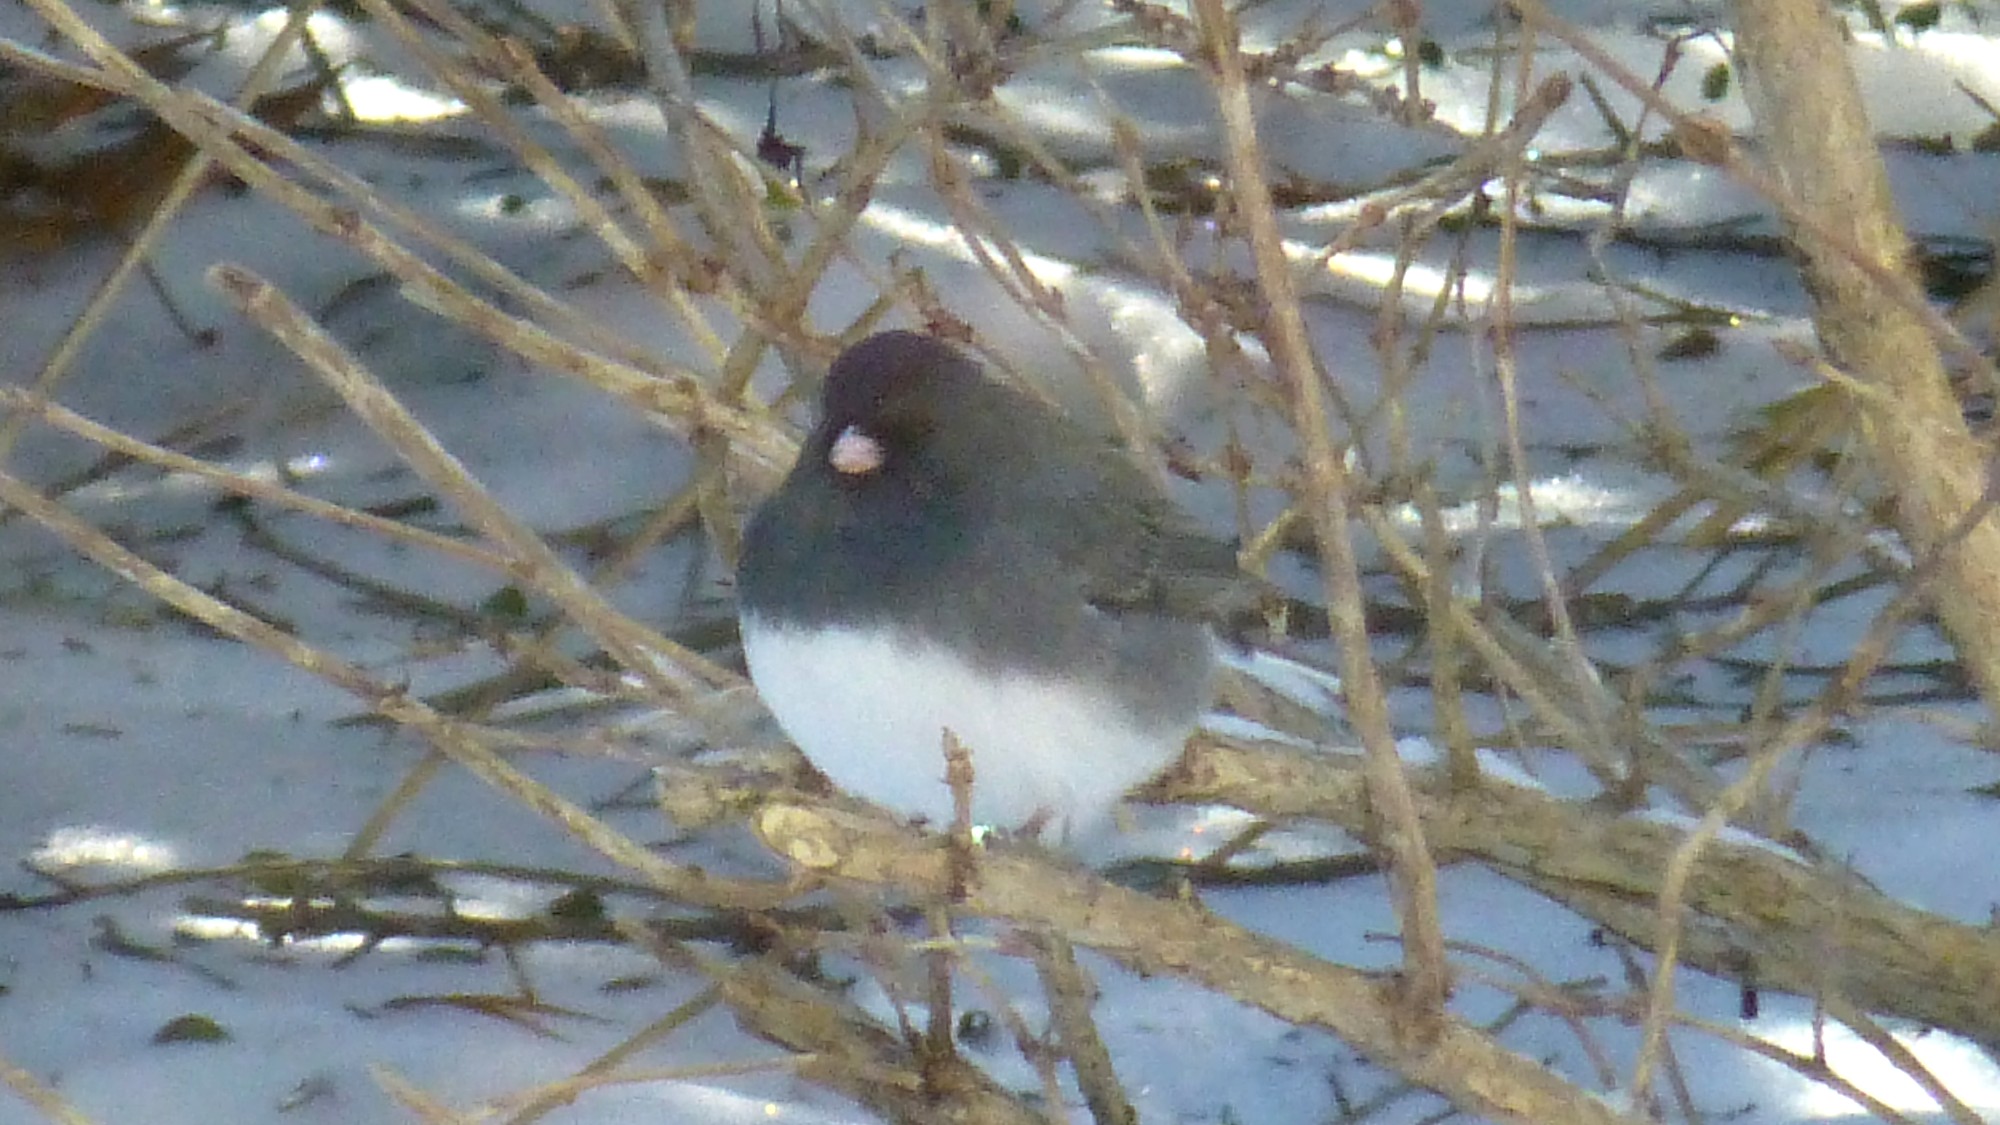 Fat bird with white chest and dark upper body sitting on a low shrub branch